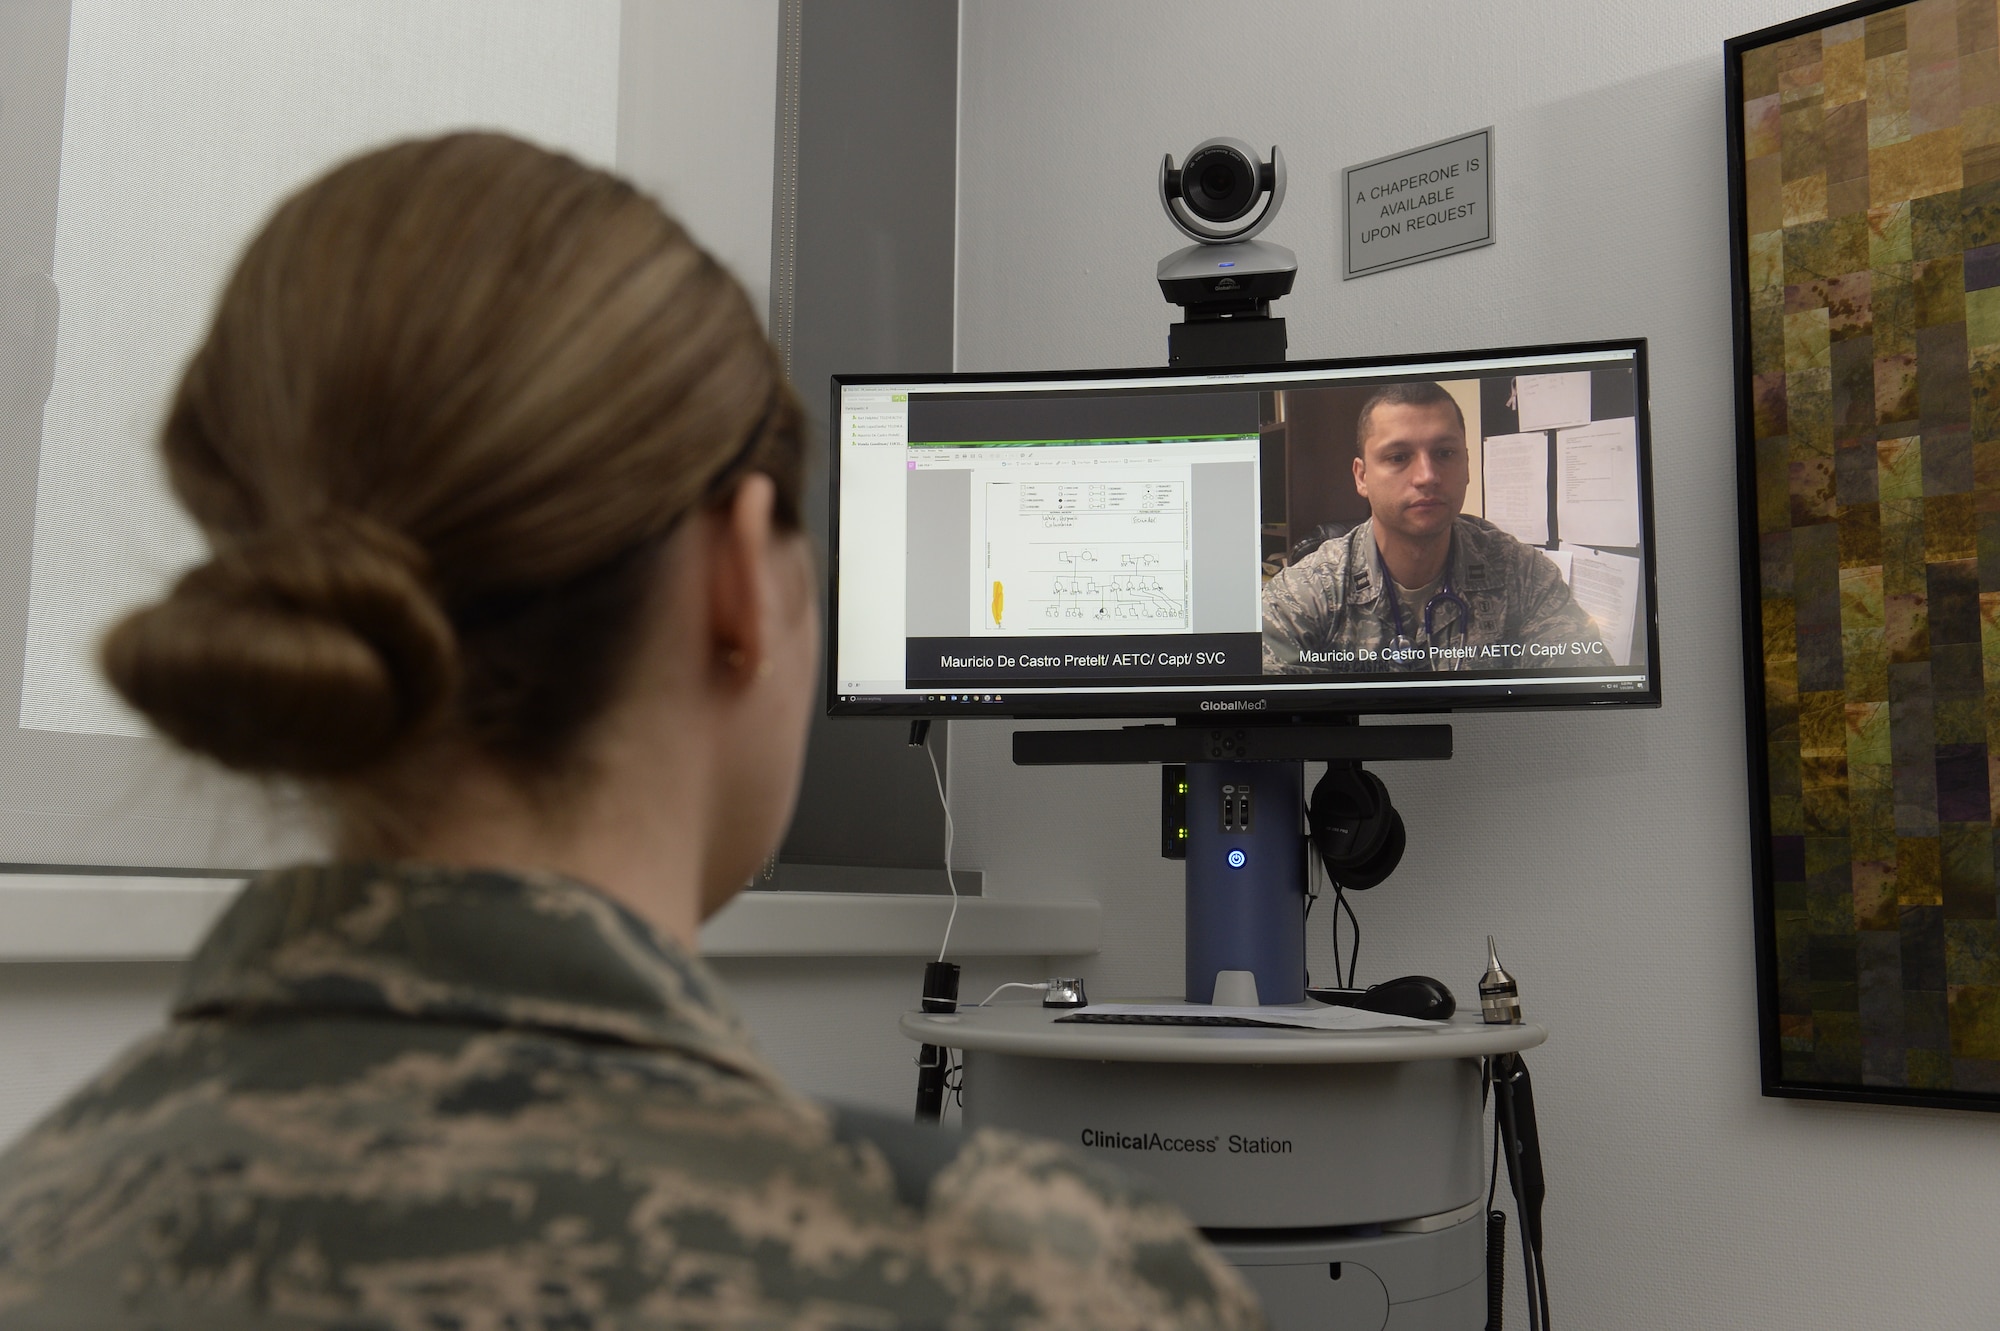 Senior Airman Kimberly Deveau (left) at Spangdahlem Air Base, Germany consults with geneticist, Capt. (Dr.) Mauricio De Castro, staff medical geneticist at Keesler Air Force Base, Miss., using the Clinical Access Station, Feb. 1, 2018. The tele-genetics pilot program connects patients directly to specialized genetic counselors and geneticists from other locations. (U.S. Air Force photo by Staff Sgt. Jonathan Snyder)